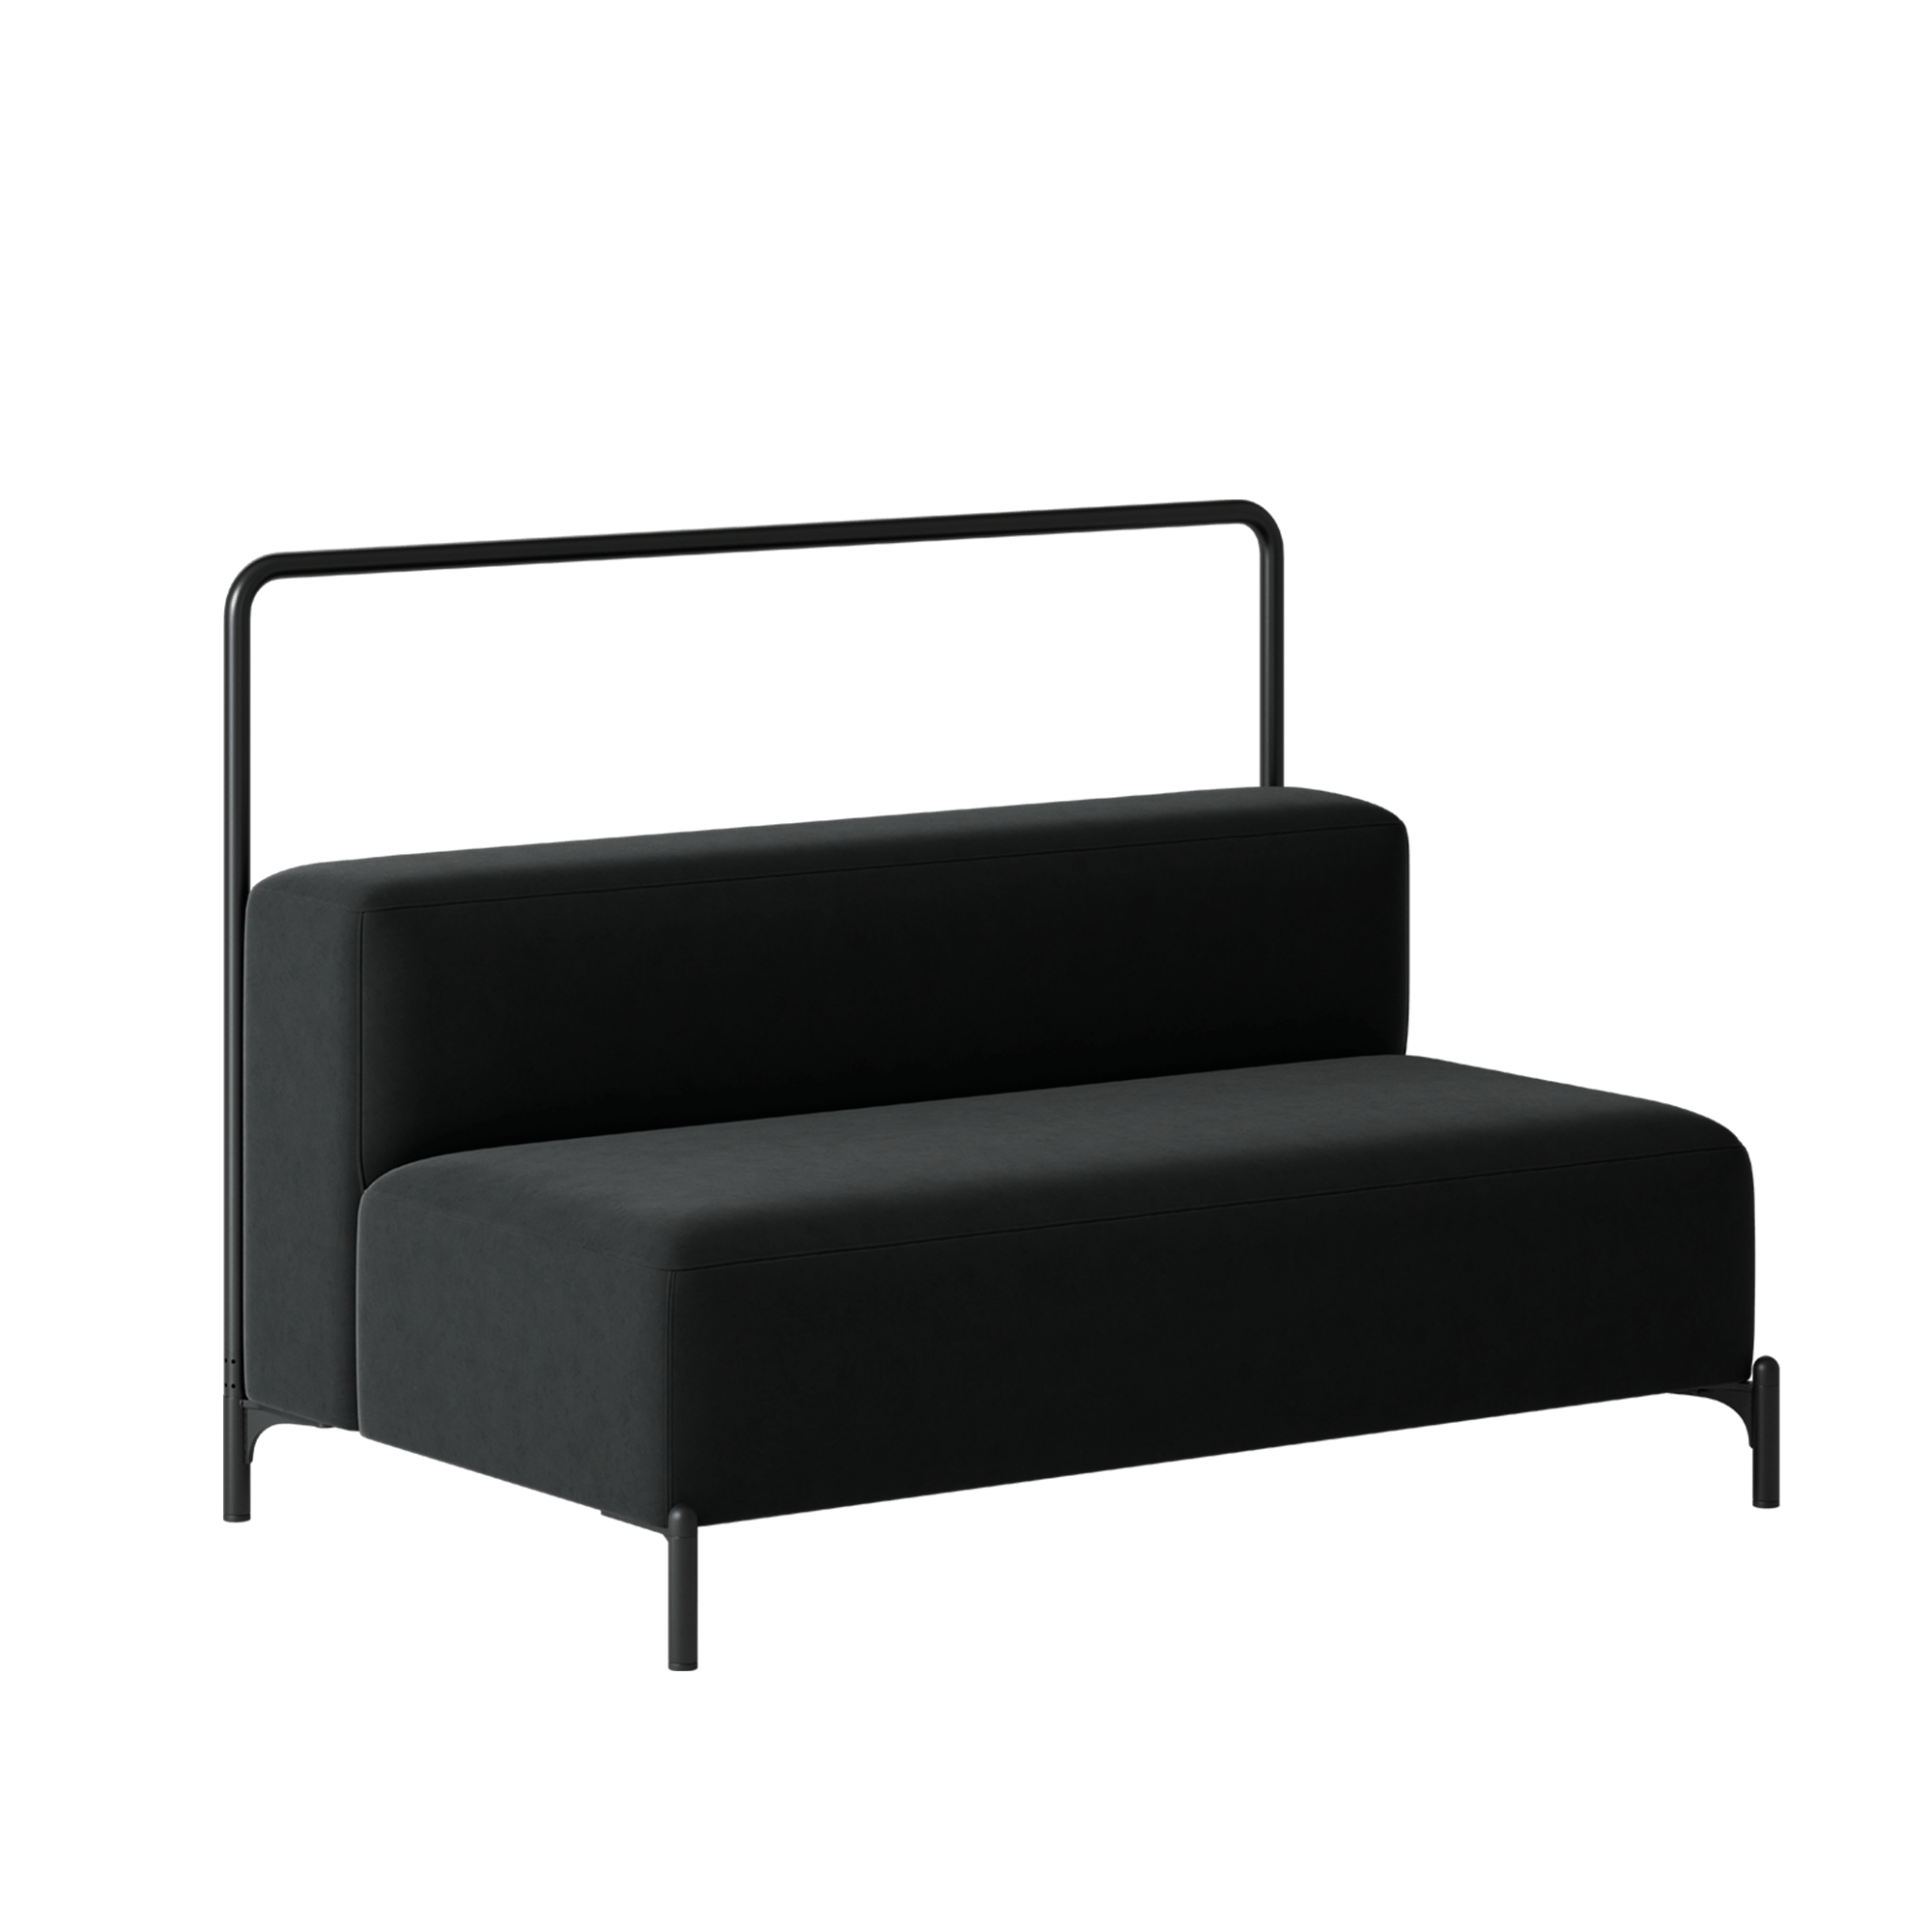 A black sofa with a metal frame on a green background.